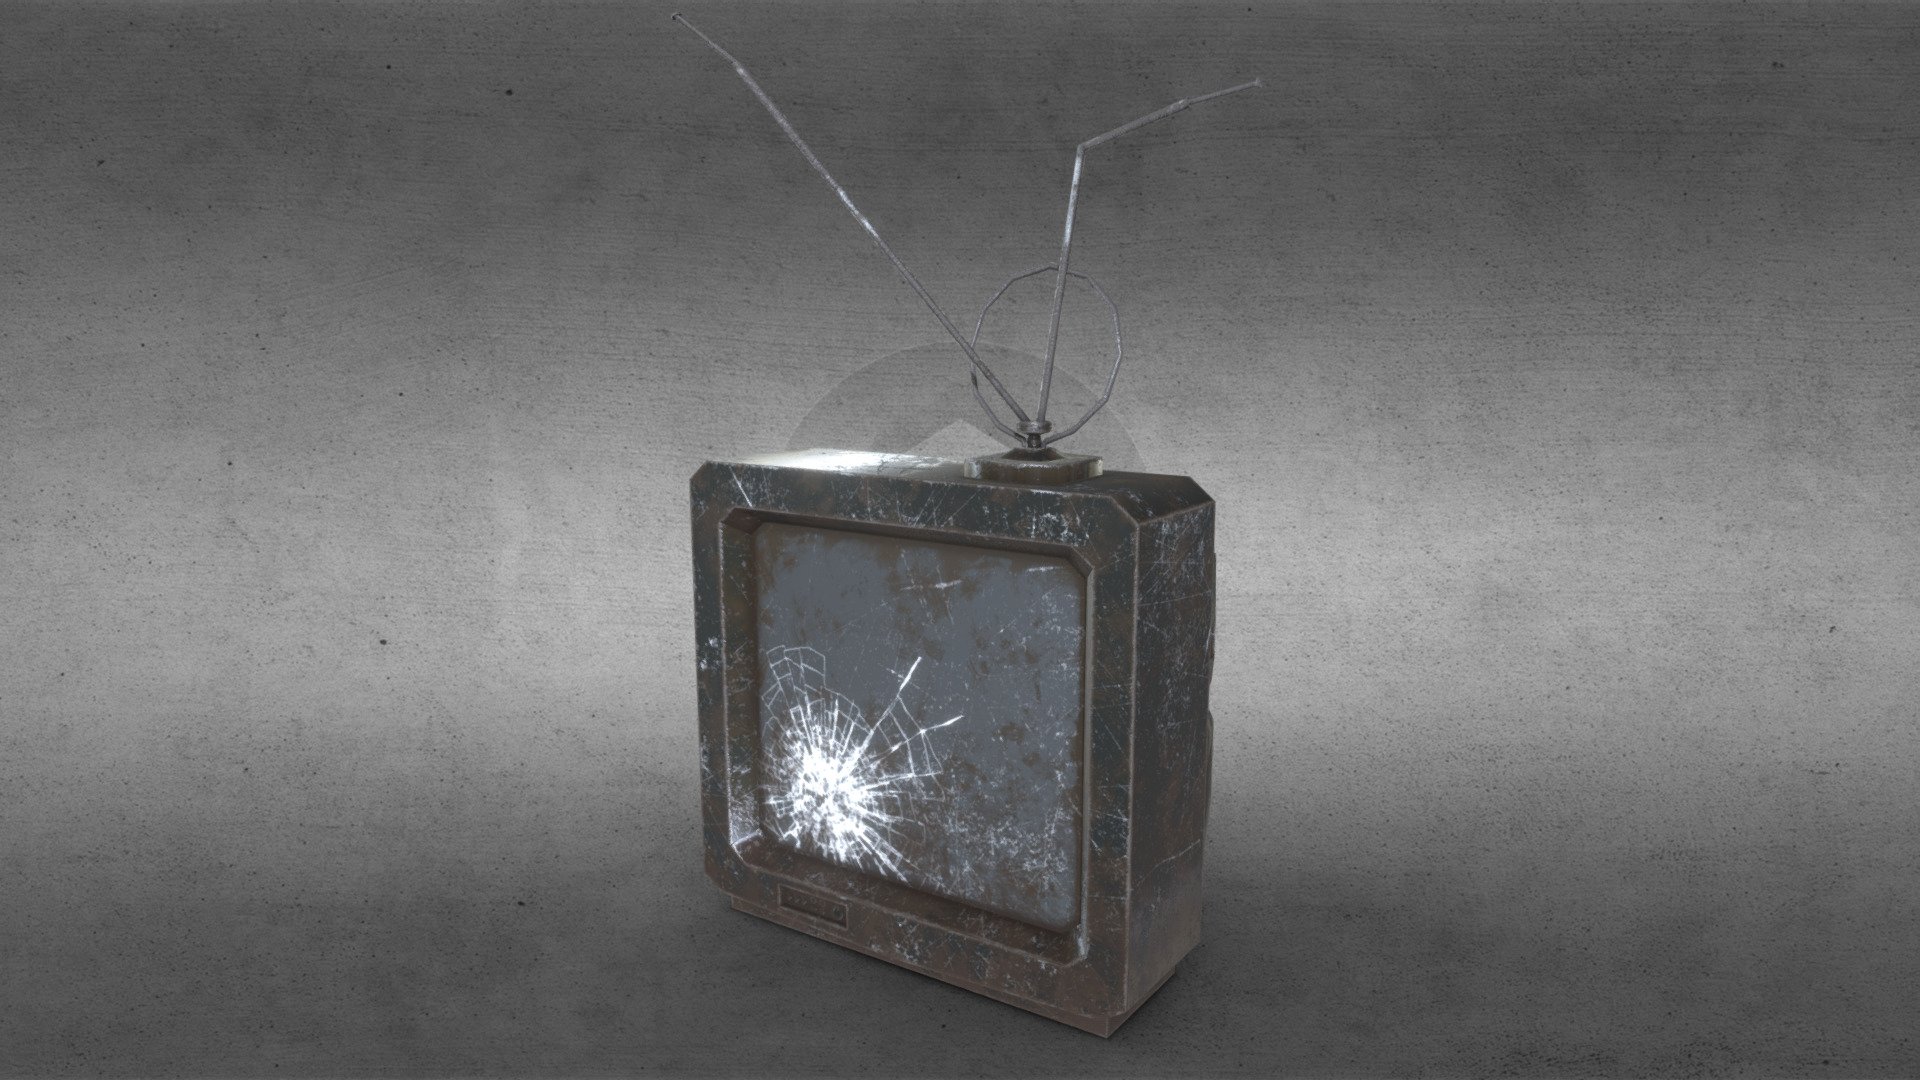 Introducing dirty old TV with broken screen.

Includes:




Old TV with antenna

For support or other information please send us an e-mail at info@sunbox.games

Check out our other work at sunbox.games - Old TV With Broken Screen - Buy Royalty Free 3D model by Sunbox Games (@sunboxgames) 3d model